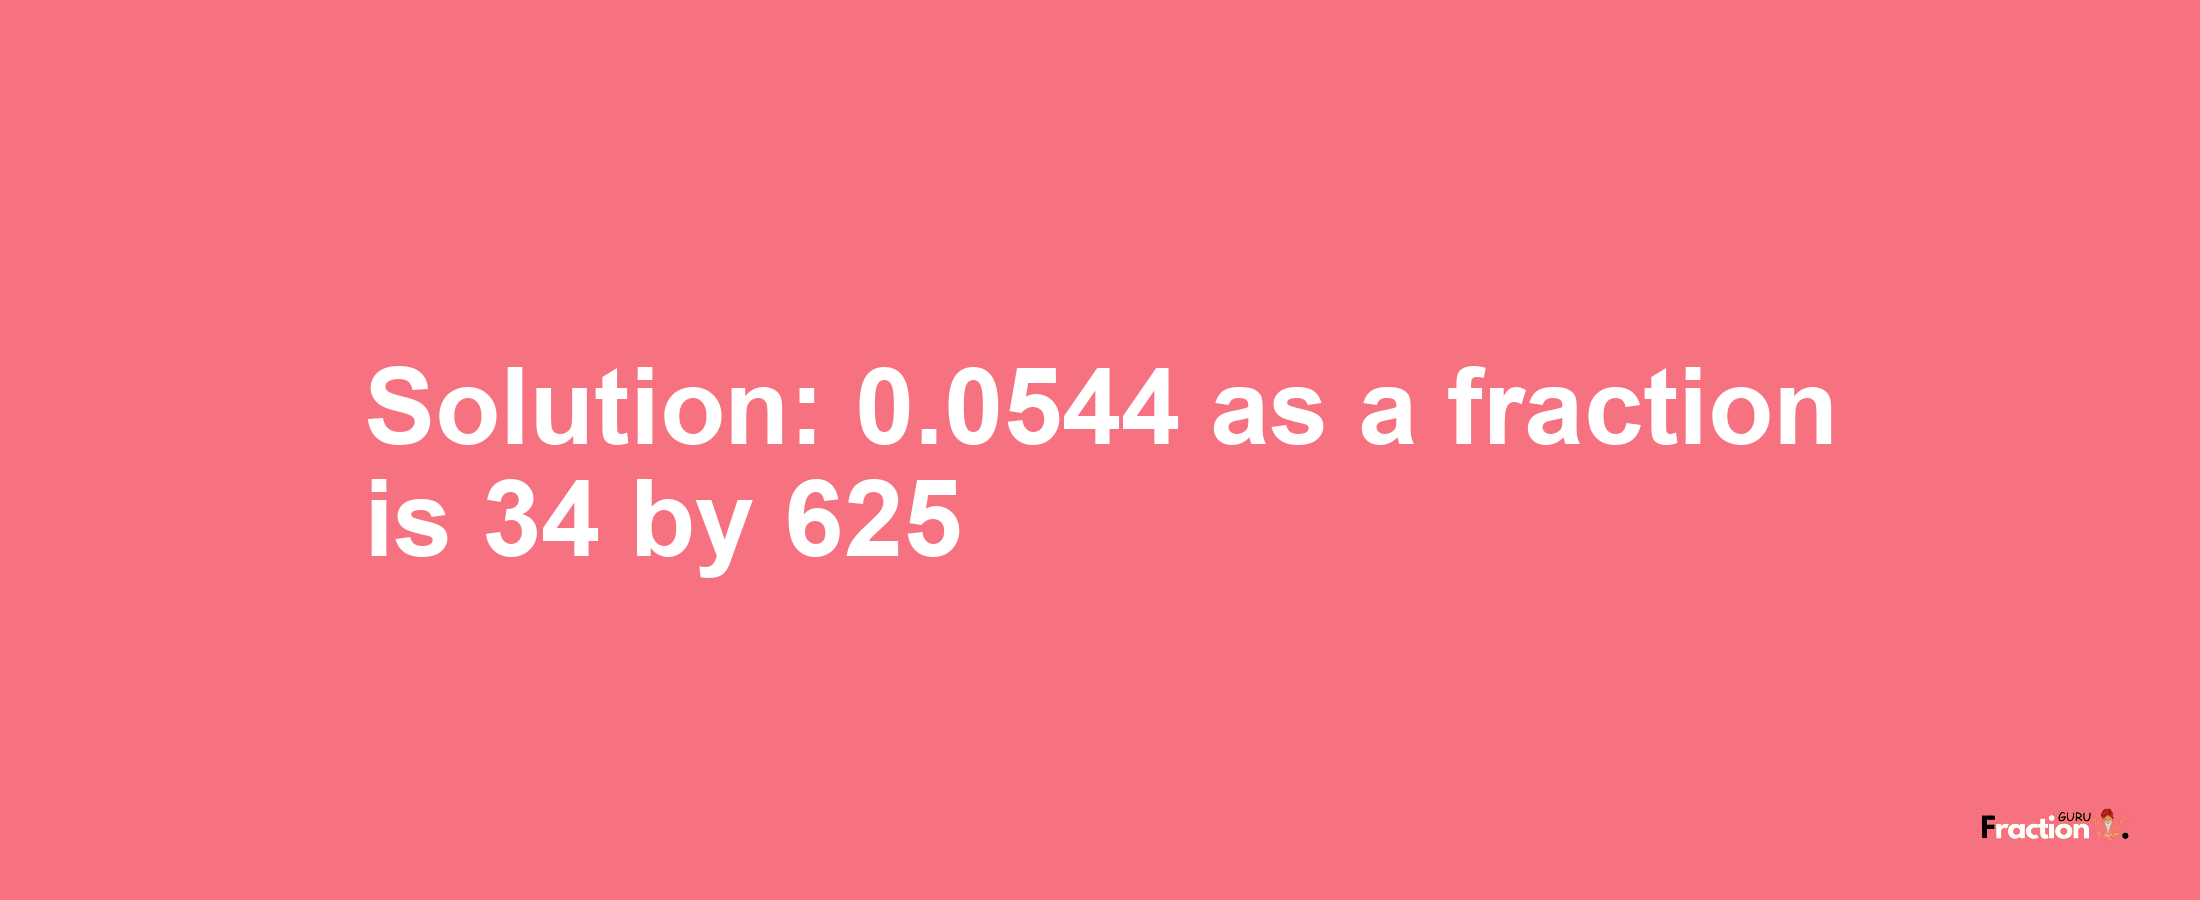 Solution:0.0544 as a fraction is 34/625